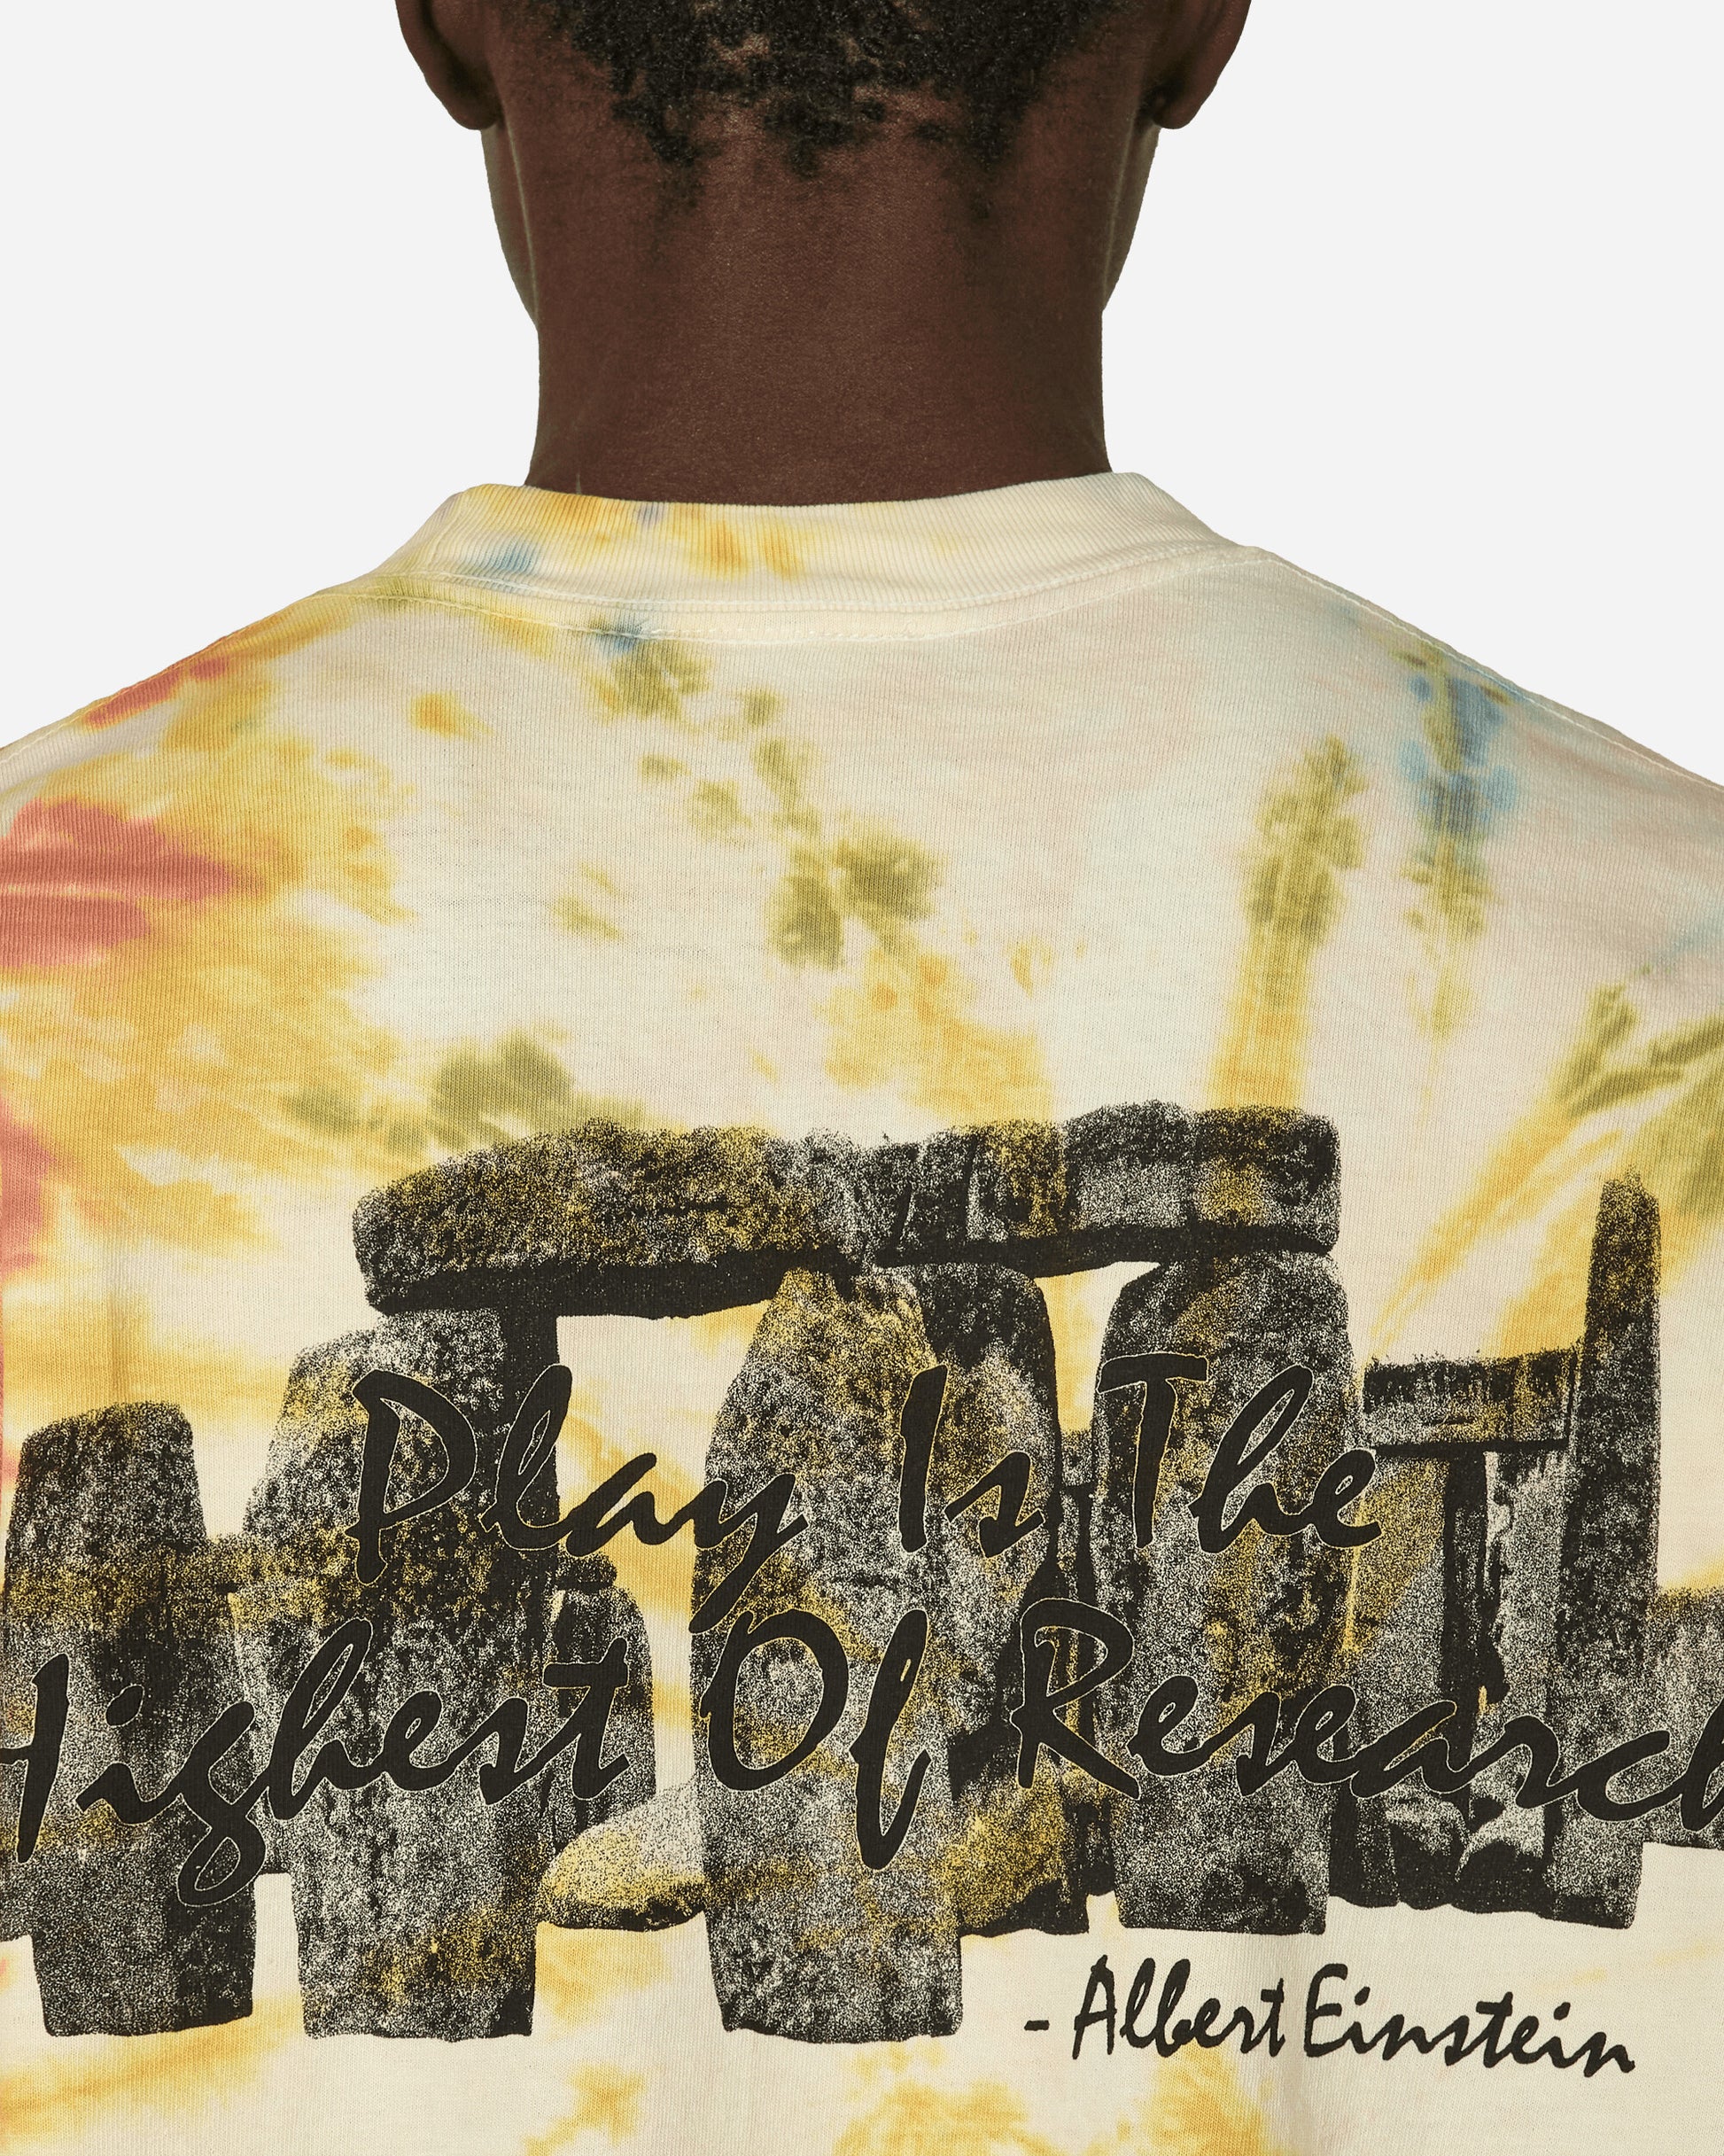 Online Ceramics Ss Tee Hand dyed tie-dye T-Shirts Shortsleeve PLAY-IS-THE-HIGH HANDDYEDTIE